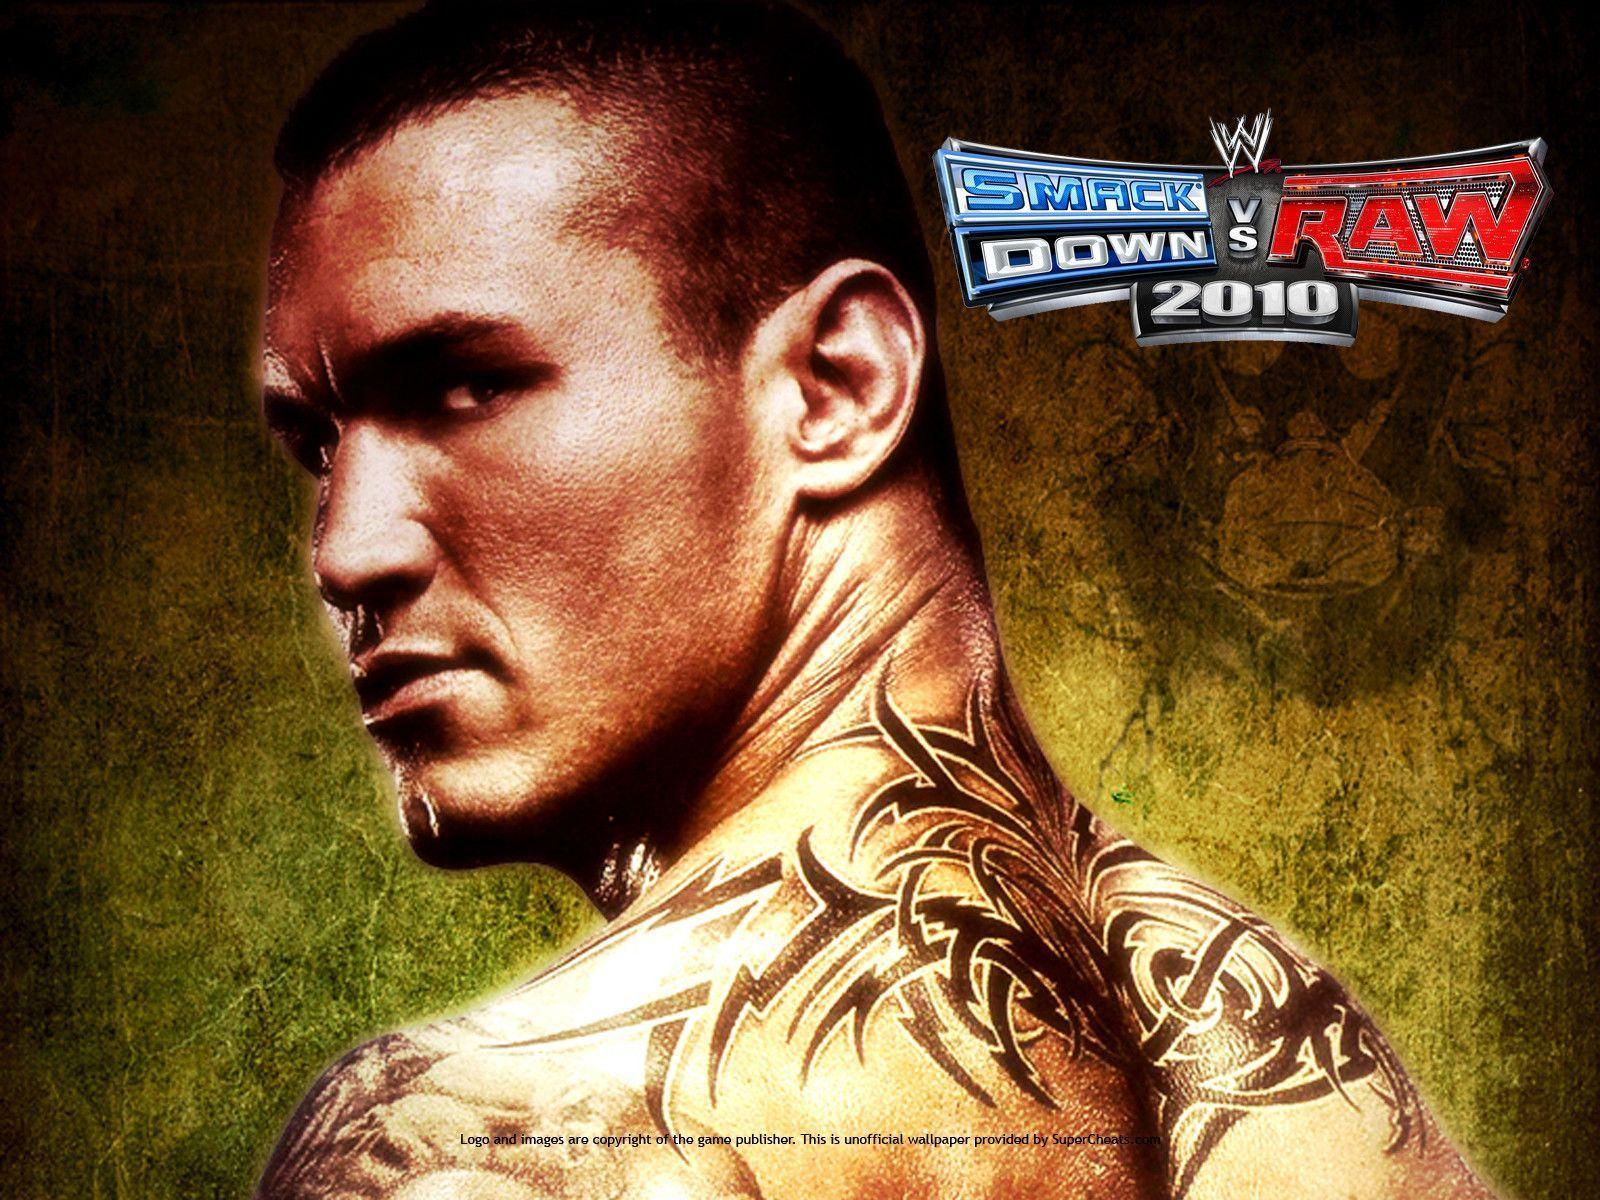 Latest Screens : WWE SmackDown! vs. RAW 2010 Wallpapers